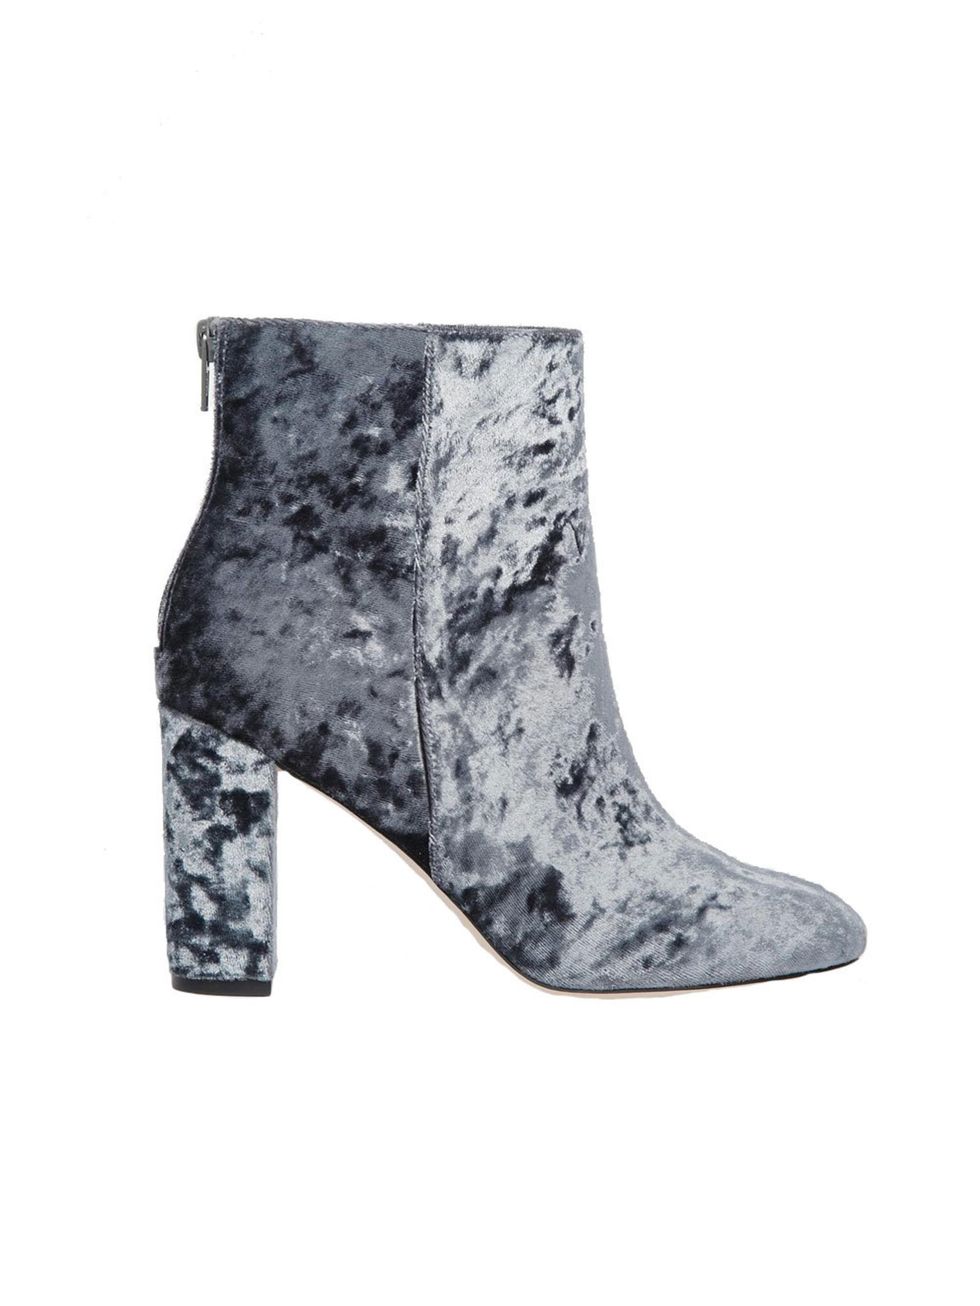 Boot, Pattern, Black, Grey, Synthetic rubber, Silver, Fashion design, Leather, High heels, 